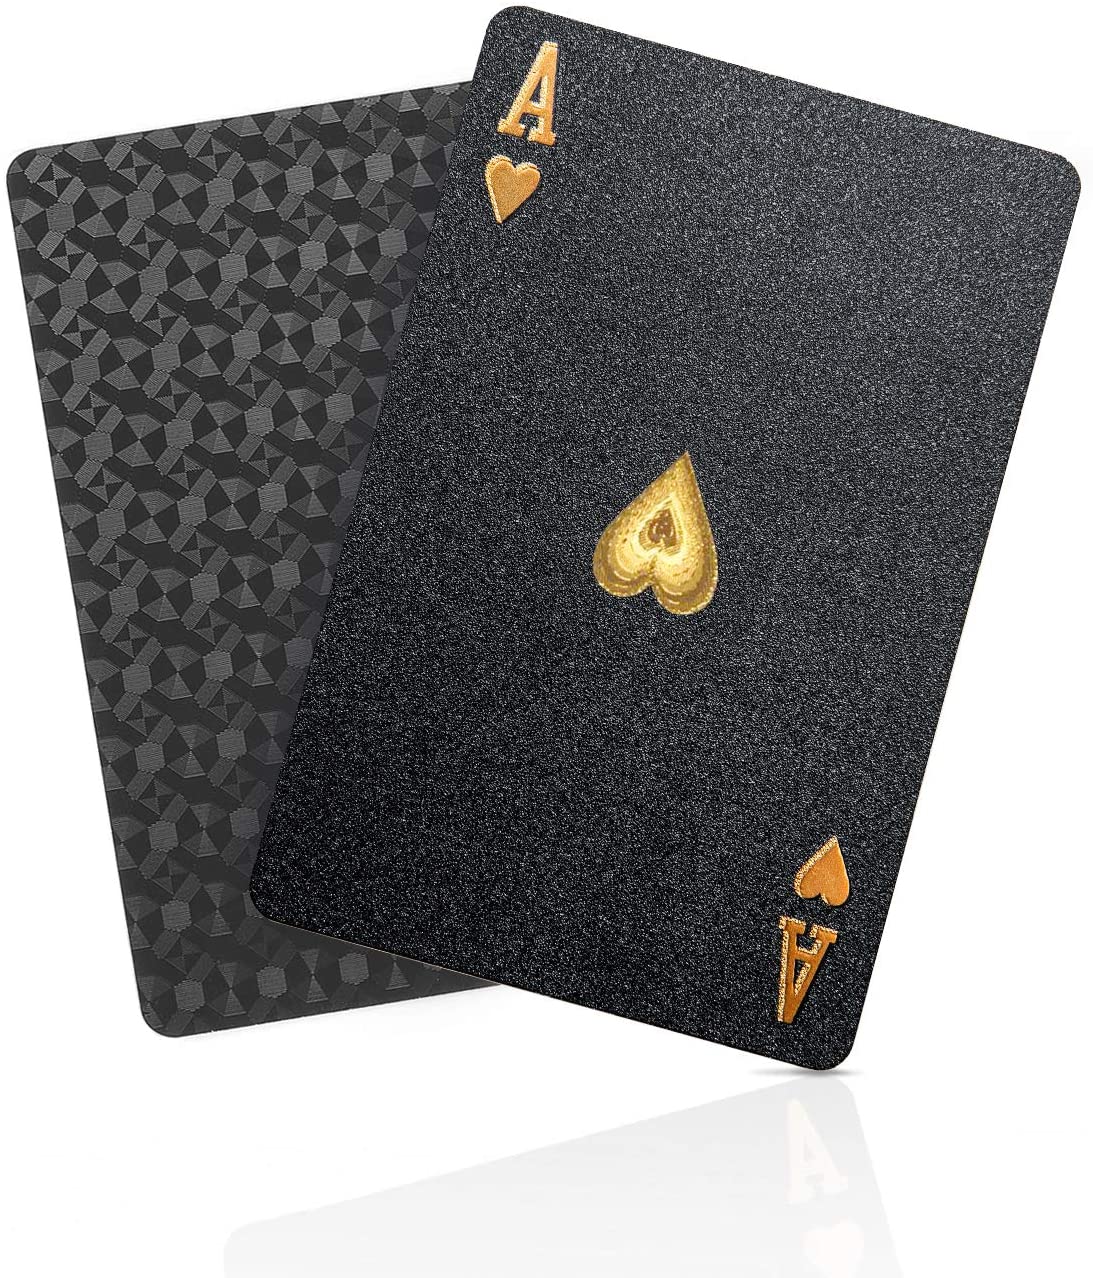 Black Matte Magic Waterproof Non Slippery Deck of Poker Cards with No Art Premium Quality 24K Gold and Silver Plated Replica Bills 3